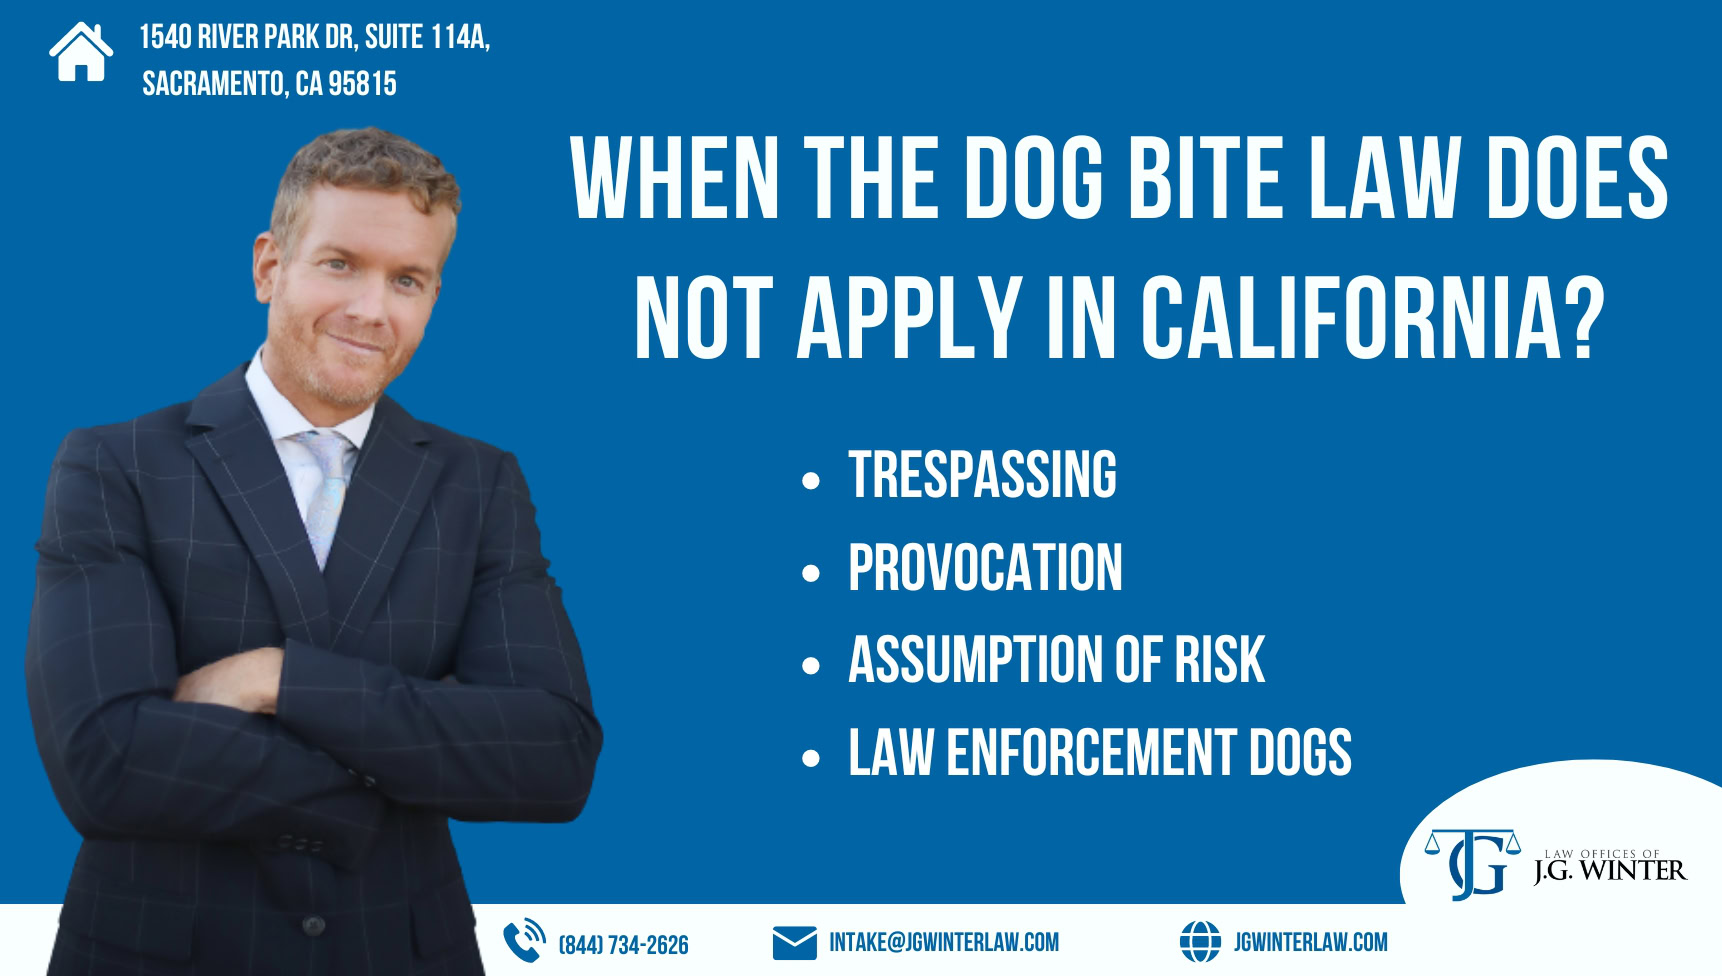 when the dog bite laws does not apply in California